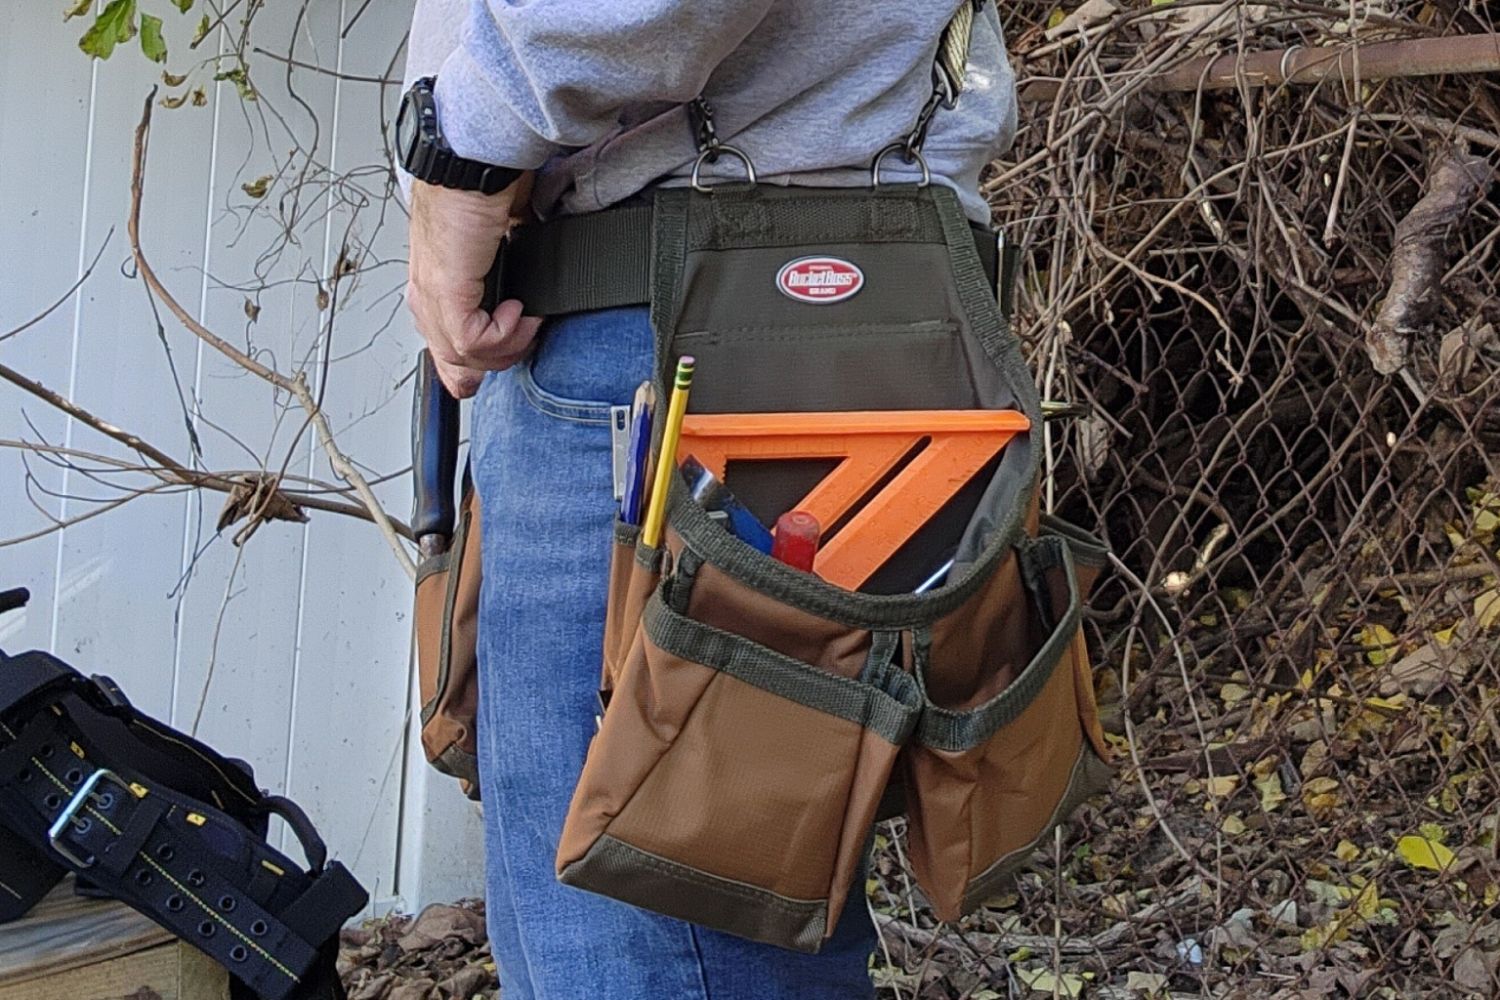 How To Keep Tool Belt From Sliding Down